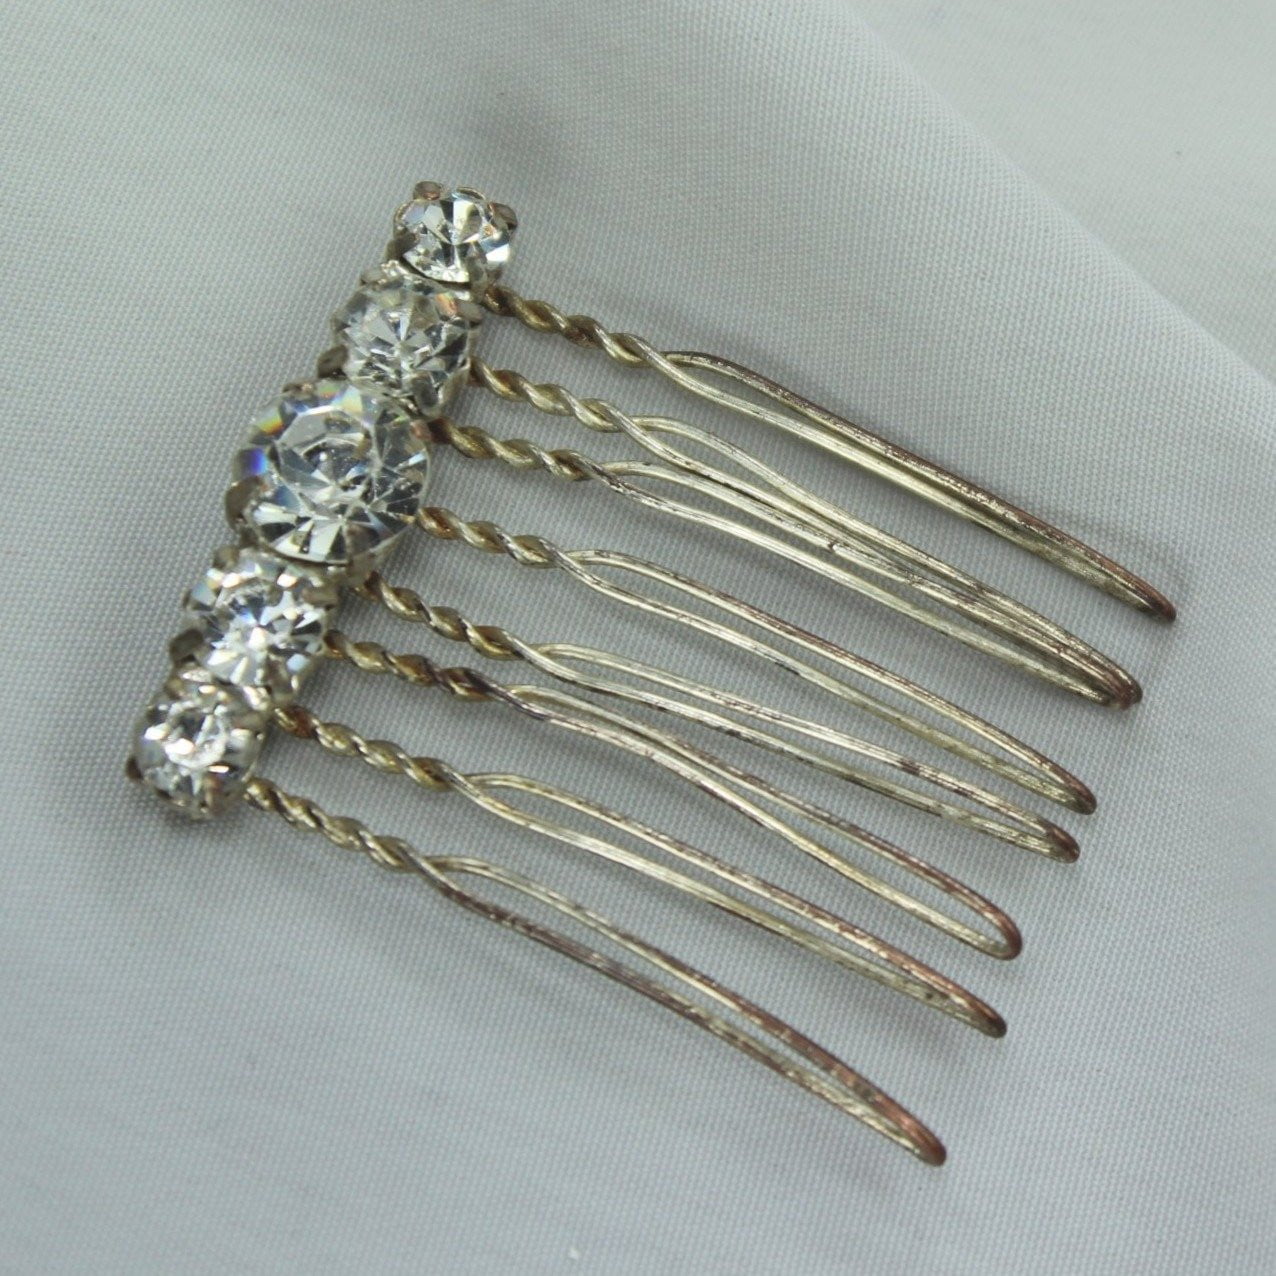 Neat Vintage Antique Hair Pin Decoration. Metal hair pin like base with large shiny Rhinestones. Metal shows vintage Stones great!  Fun piece.  jewelry